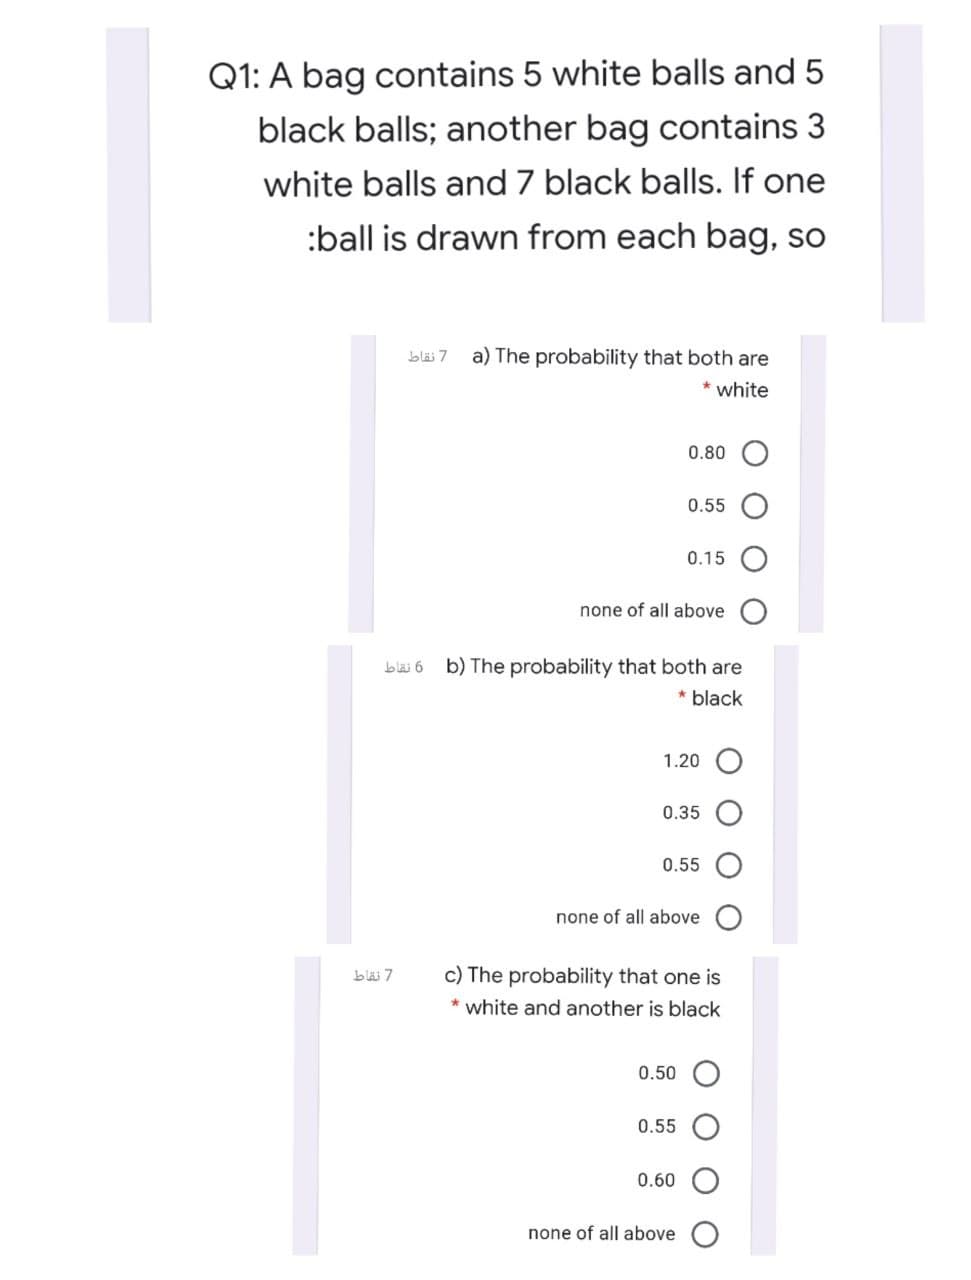 Q1: A bag contains 5 white balls and 5
black balls; another bag contains 3
white balls and 7 black balls. If one
:ball is drawn from each bag, so
bläi 7
a) The probability that both are
* white
0.80
0.55
0.15
none of all above
blai 6
b) The probability that both are
* black
1.20 O
0.35
0.55
none of all above
bläi 7
c) The probability that one is
* white and another is black
0.50
0.55
0.60
none of all above
